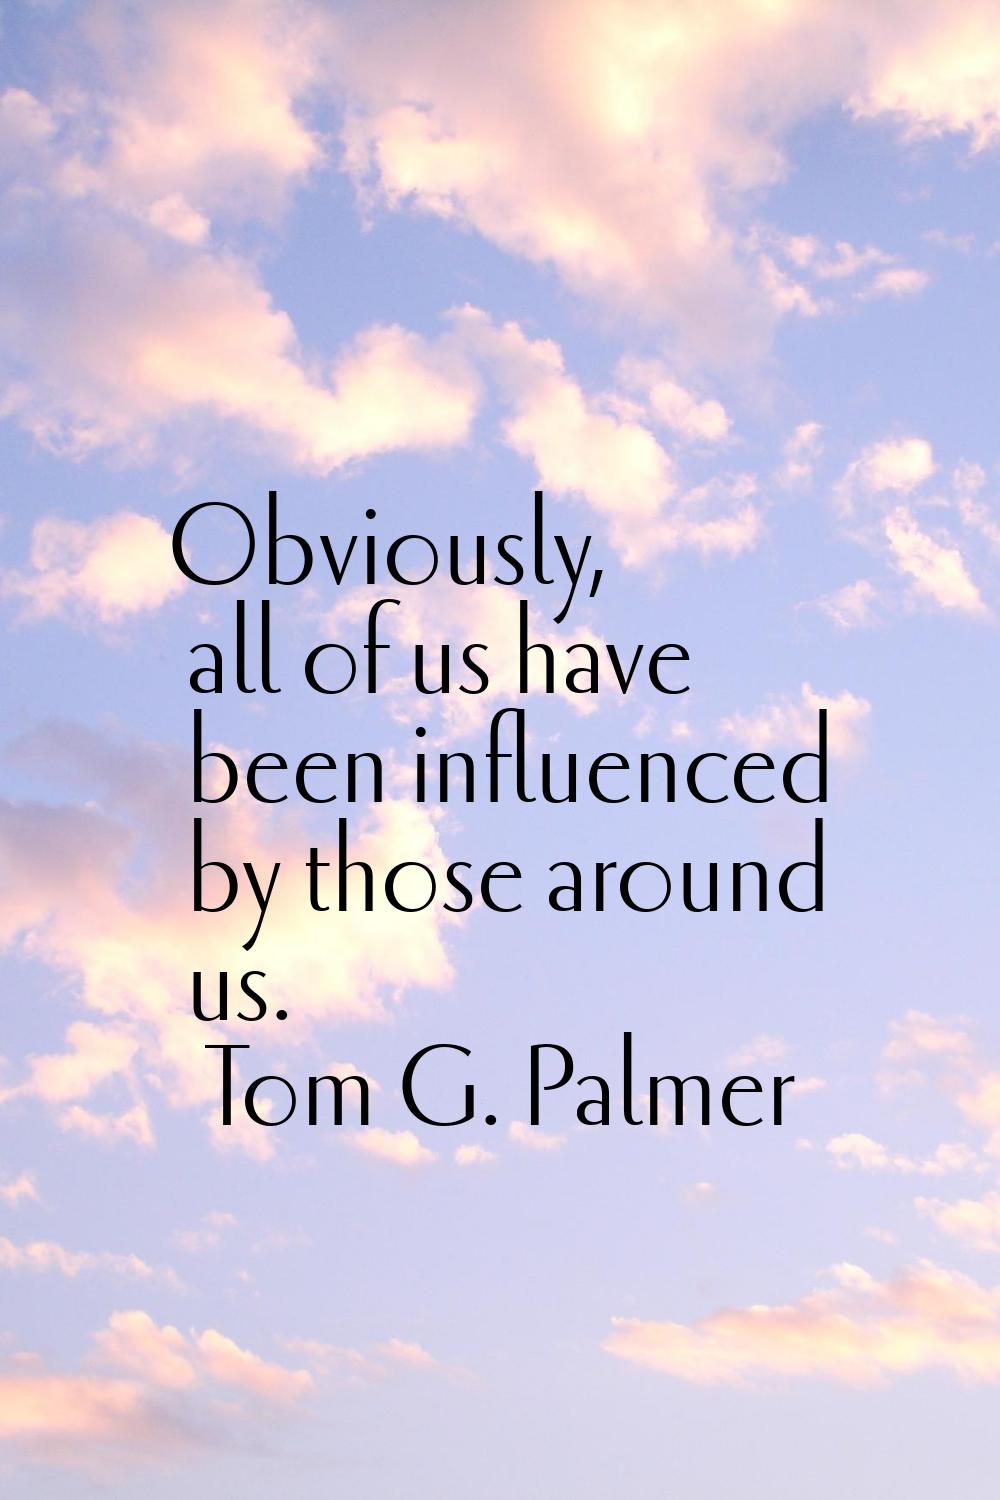 Obviously, all of us have been influenced by those around us.